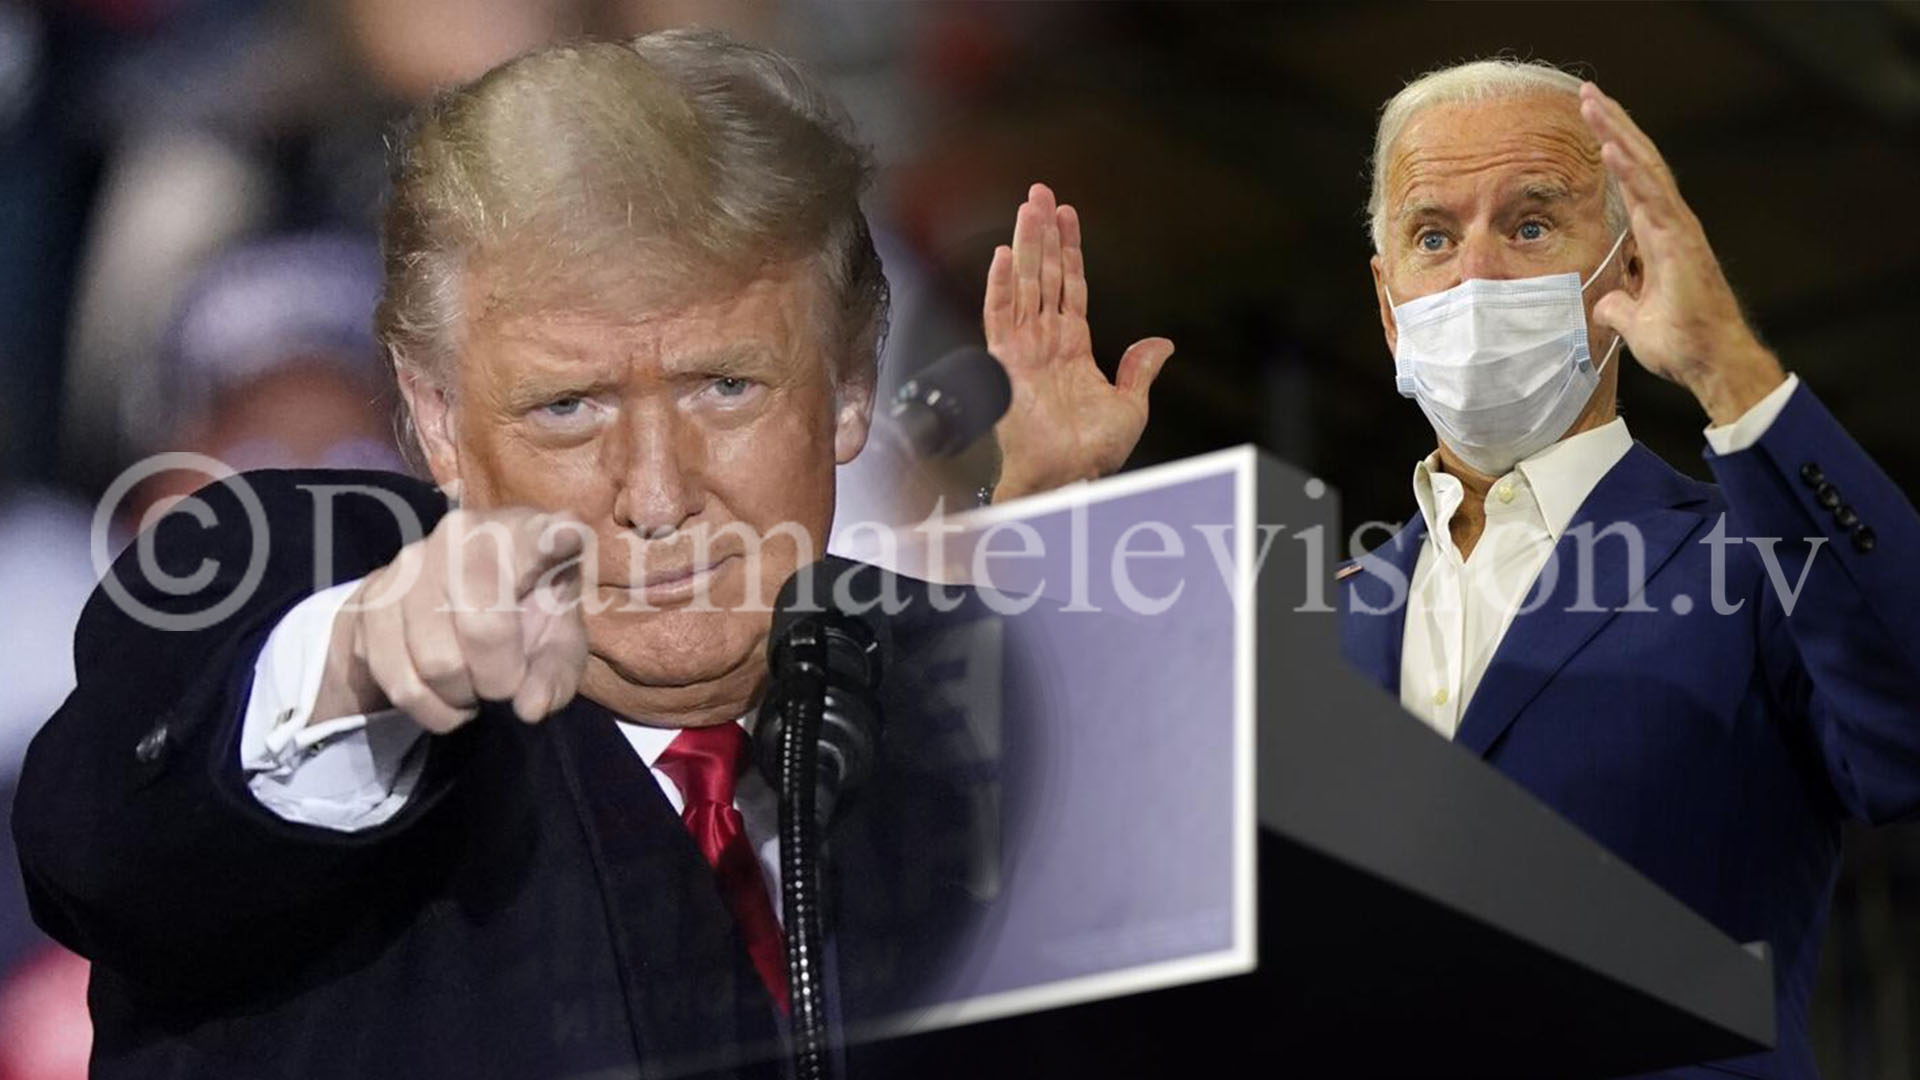 US Elections -Biden's lead over Trump remains steady